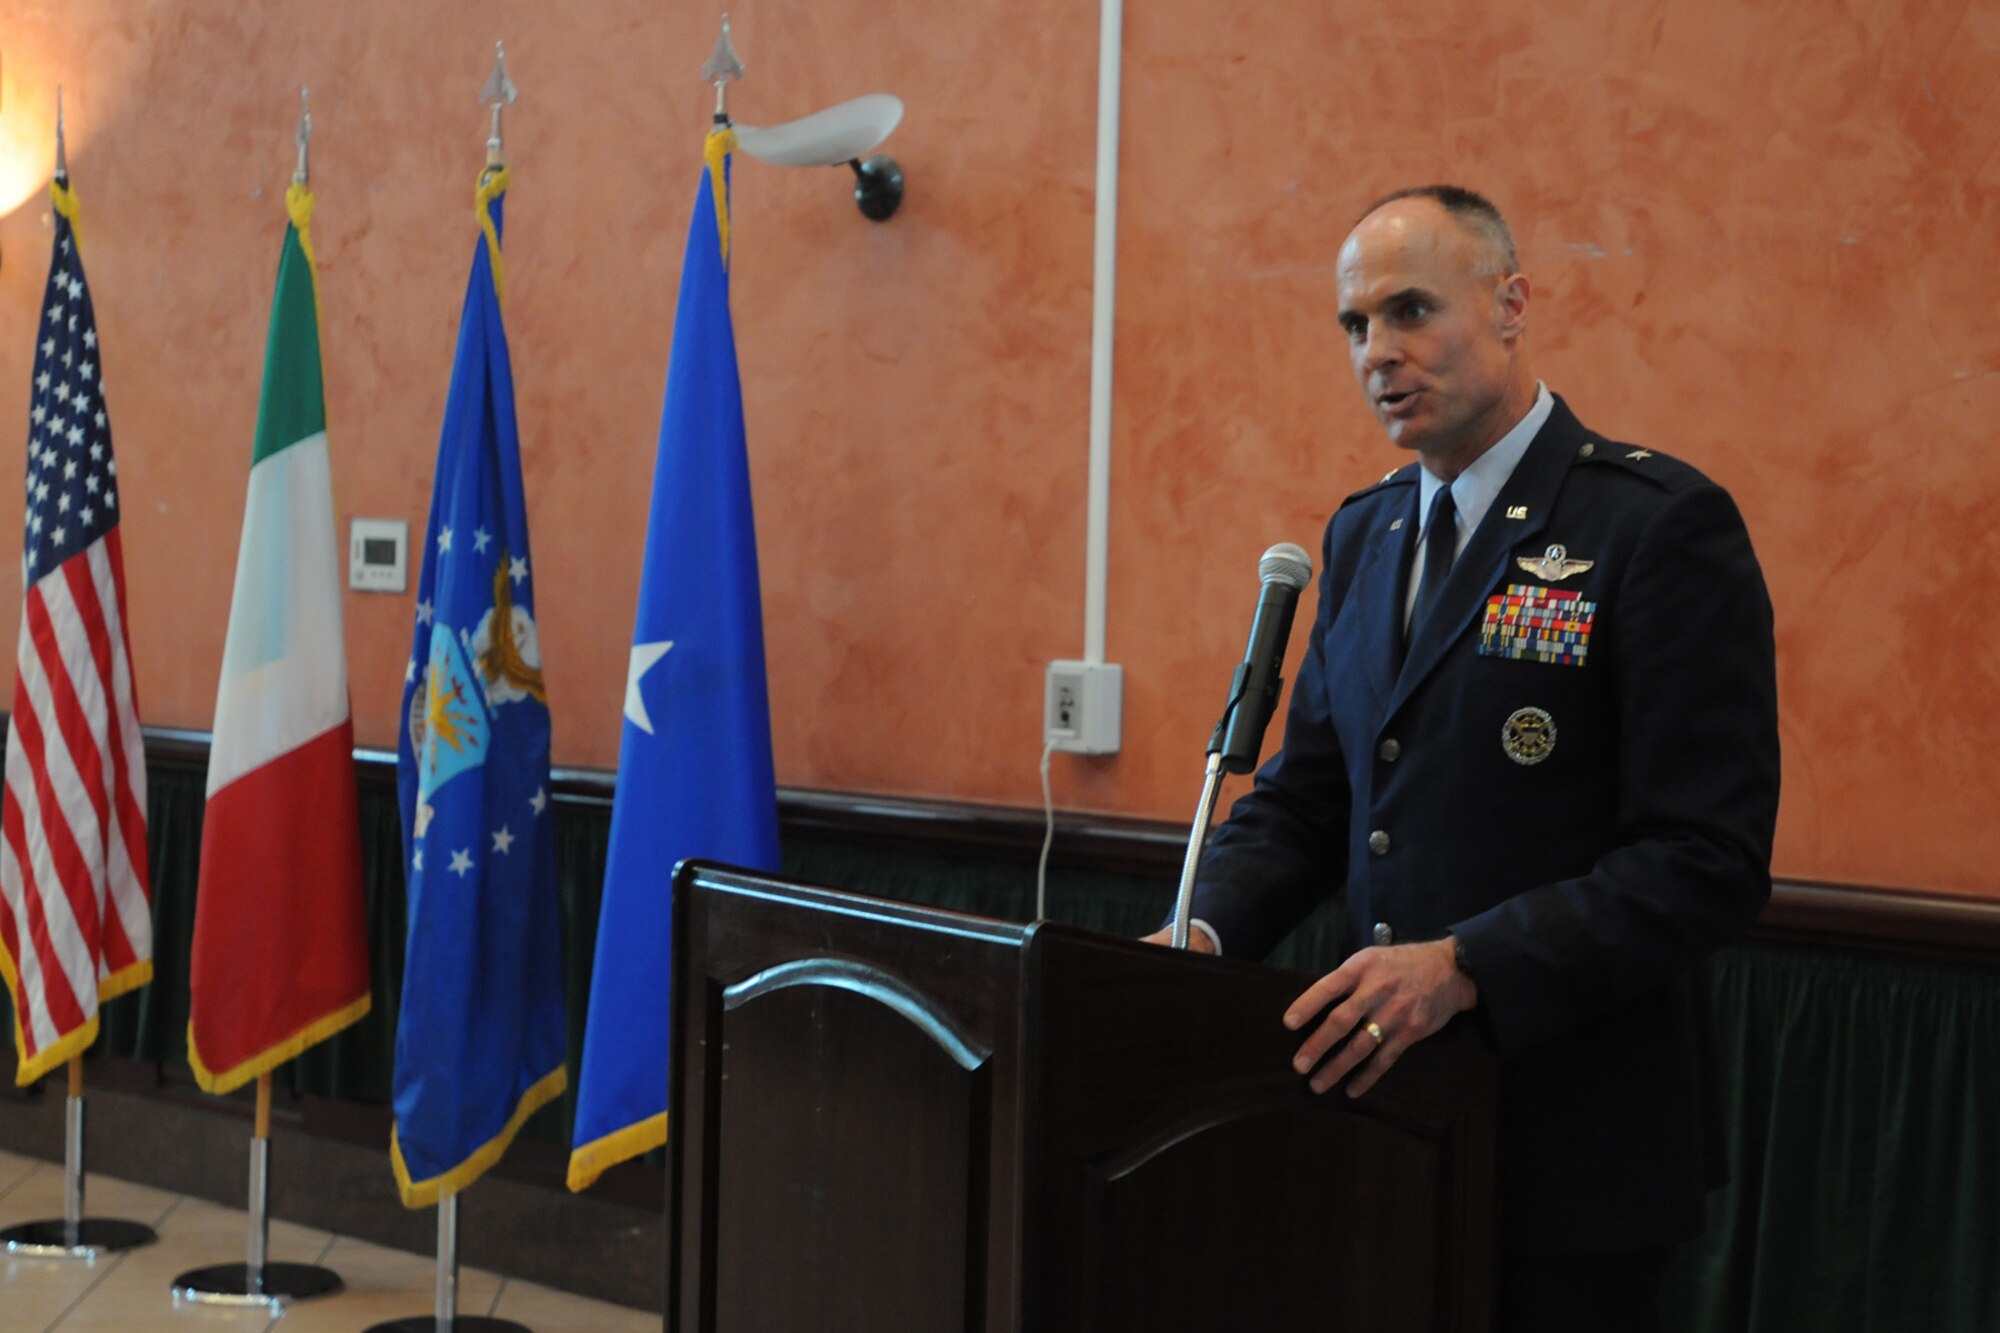 Brig. Gen. Craig Franklin, 31st Fighter Wing commander, welcoms the 12 newest members of the 31st FW Honorary Squadron Commander Program following their assumption of command ceremony held at the La Bella Vista Club at Aviano Air Base, Italy, May 8, 2009.  (U.S. Air Force photo/Staff Sgt. Patrick Dixon)